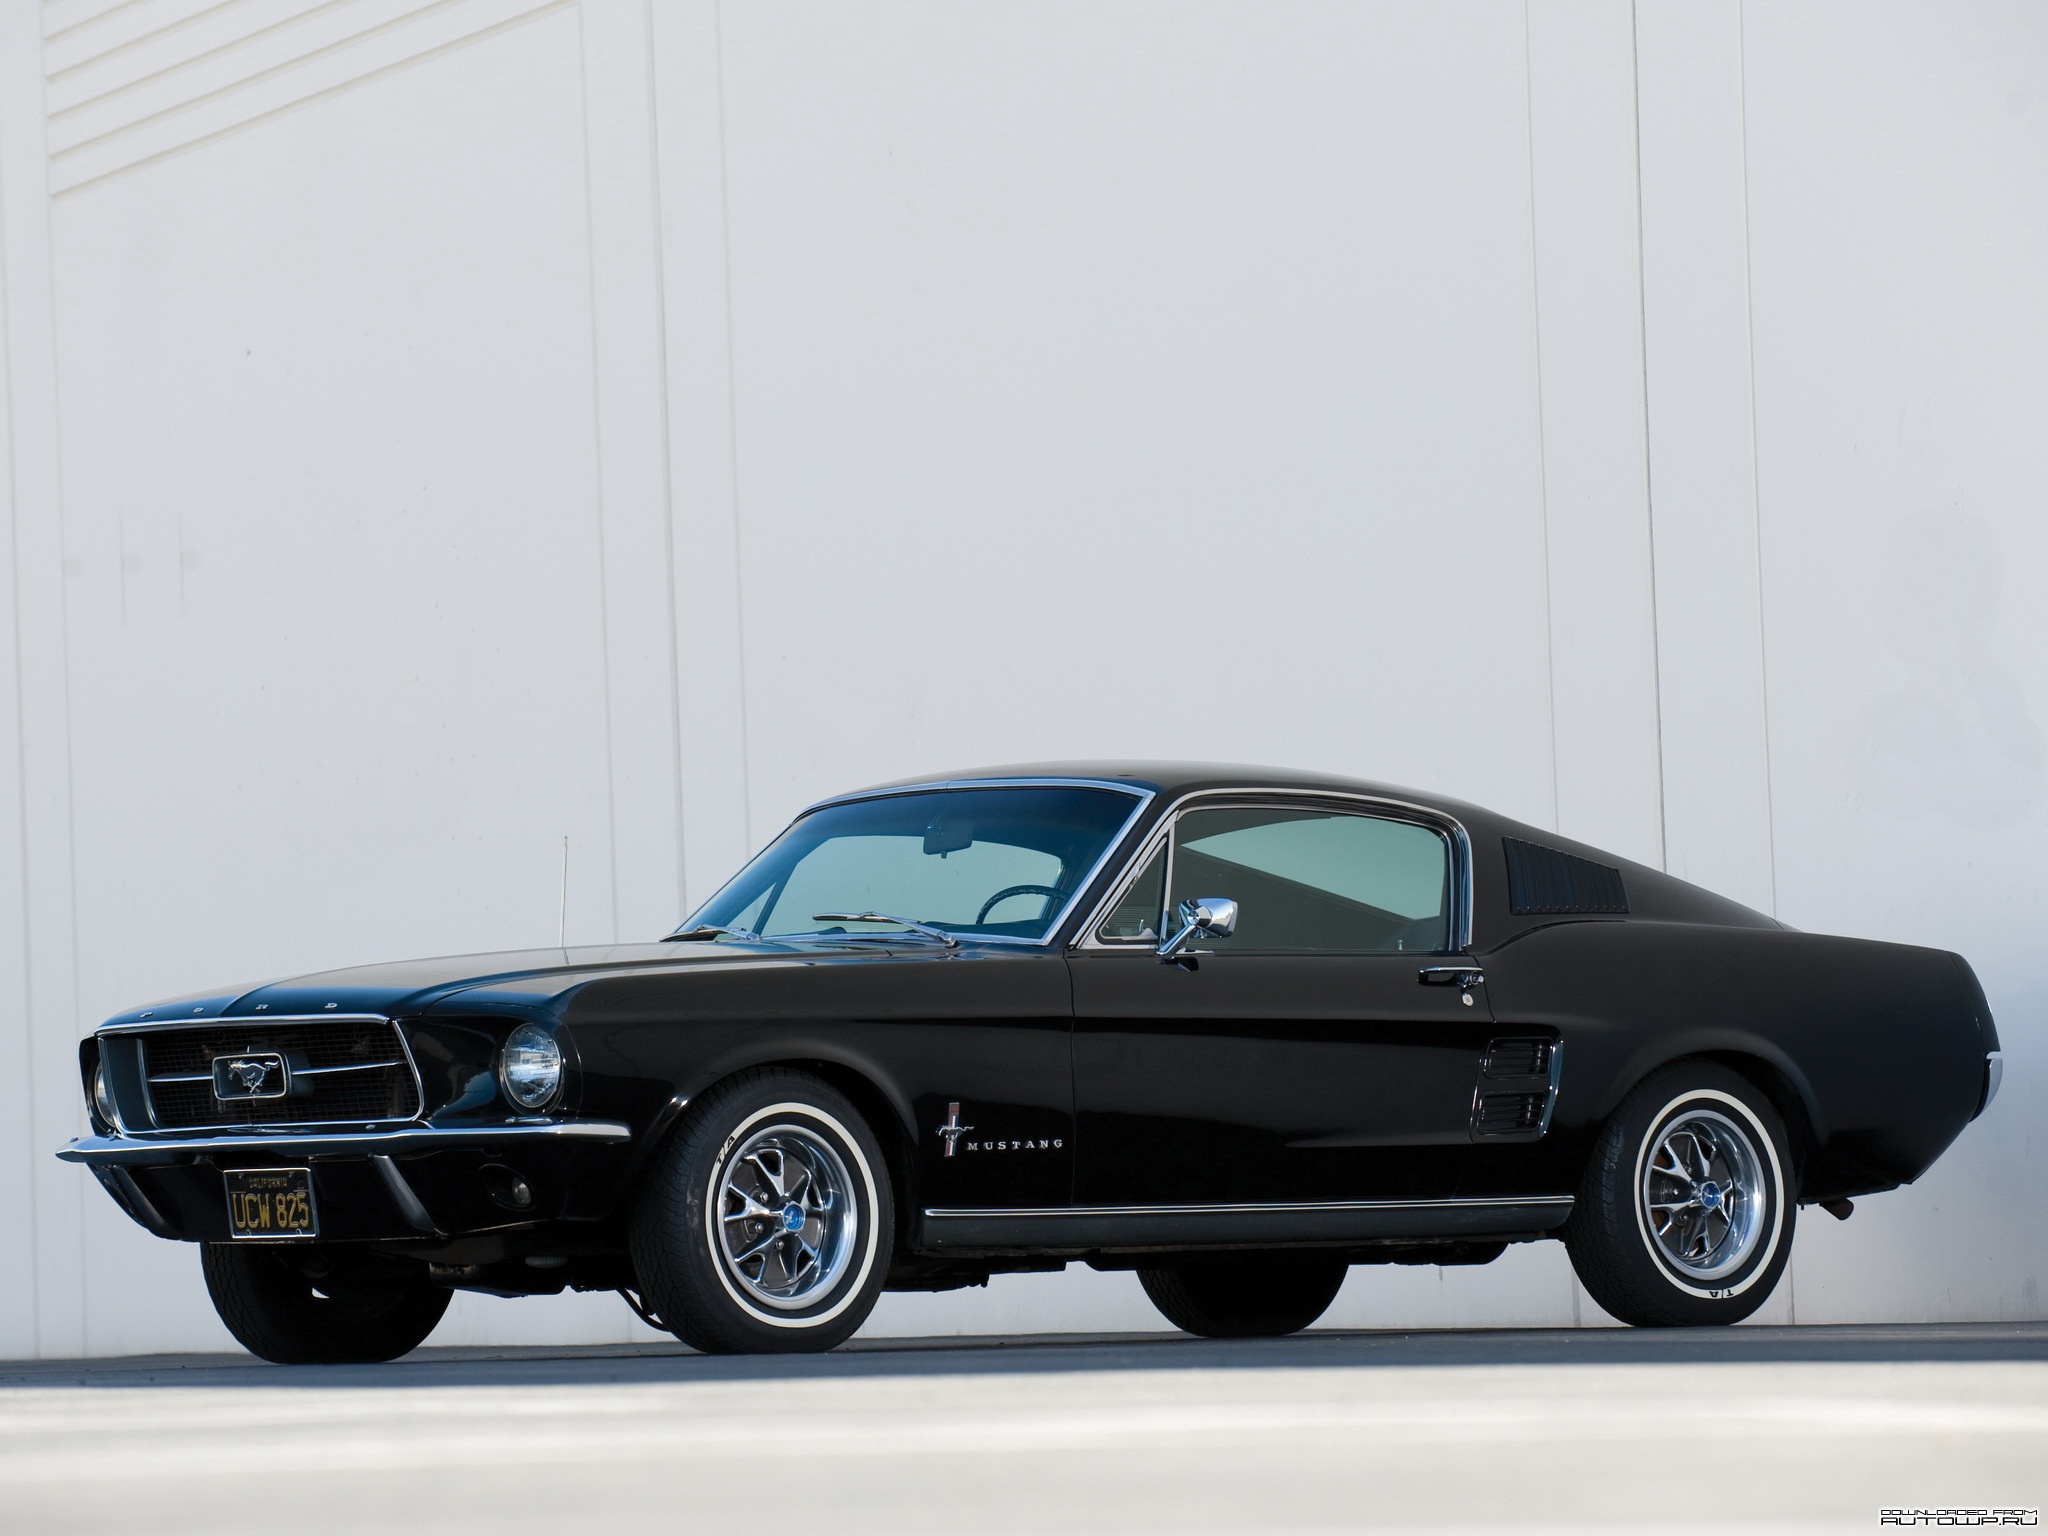 Black Car Ford Mustang Fastback Muscle Car 2048x1536